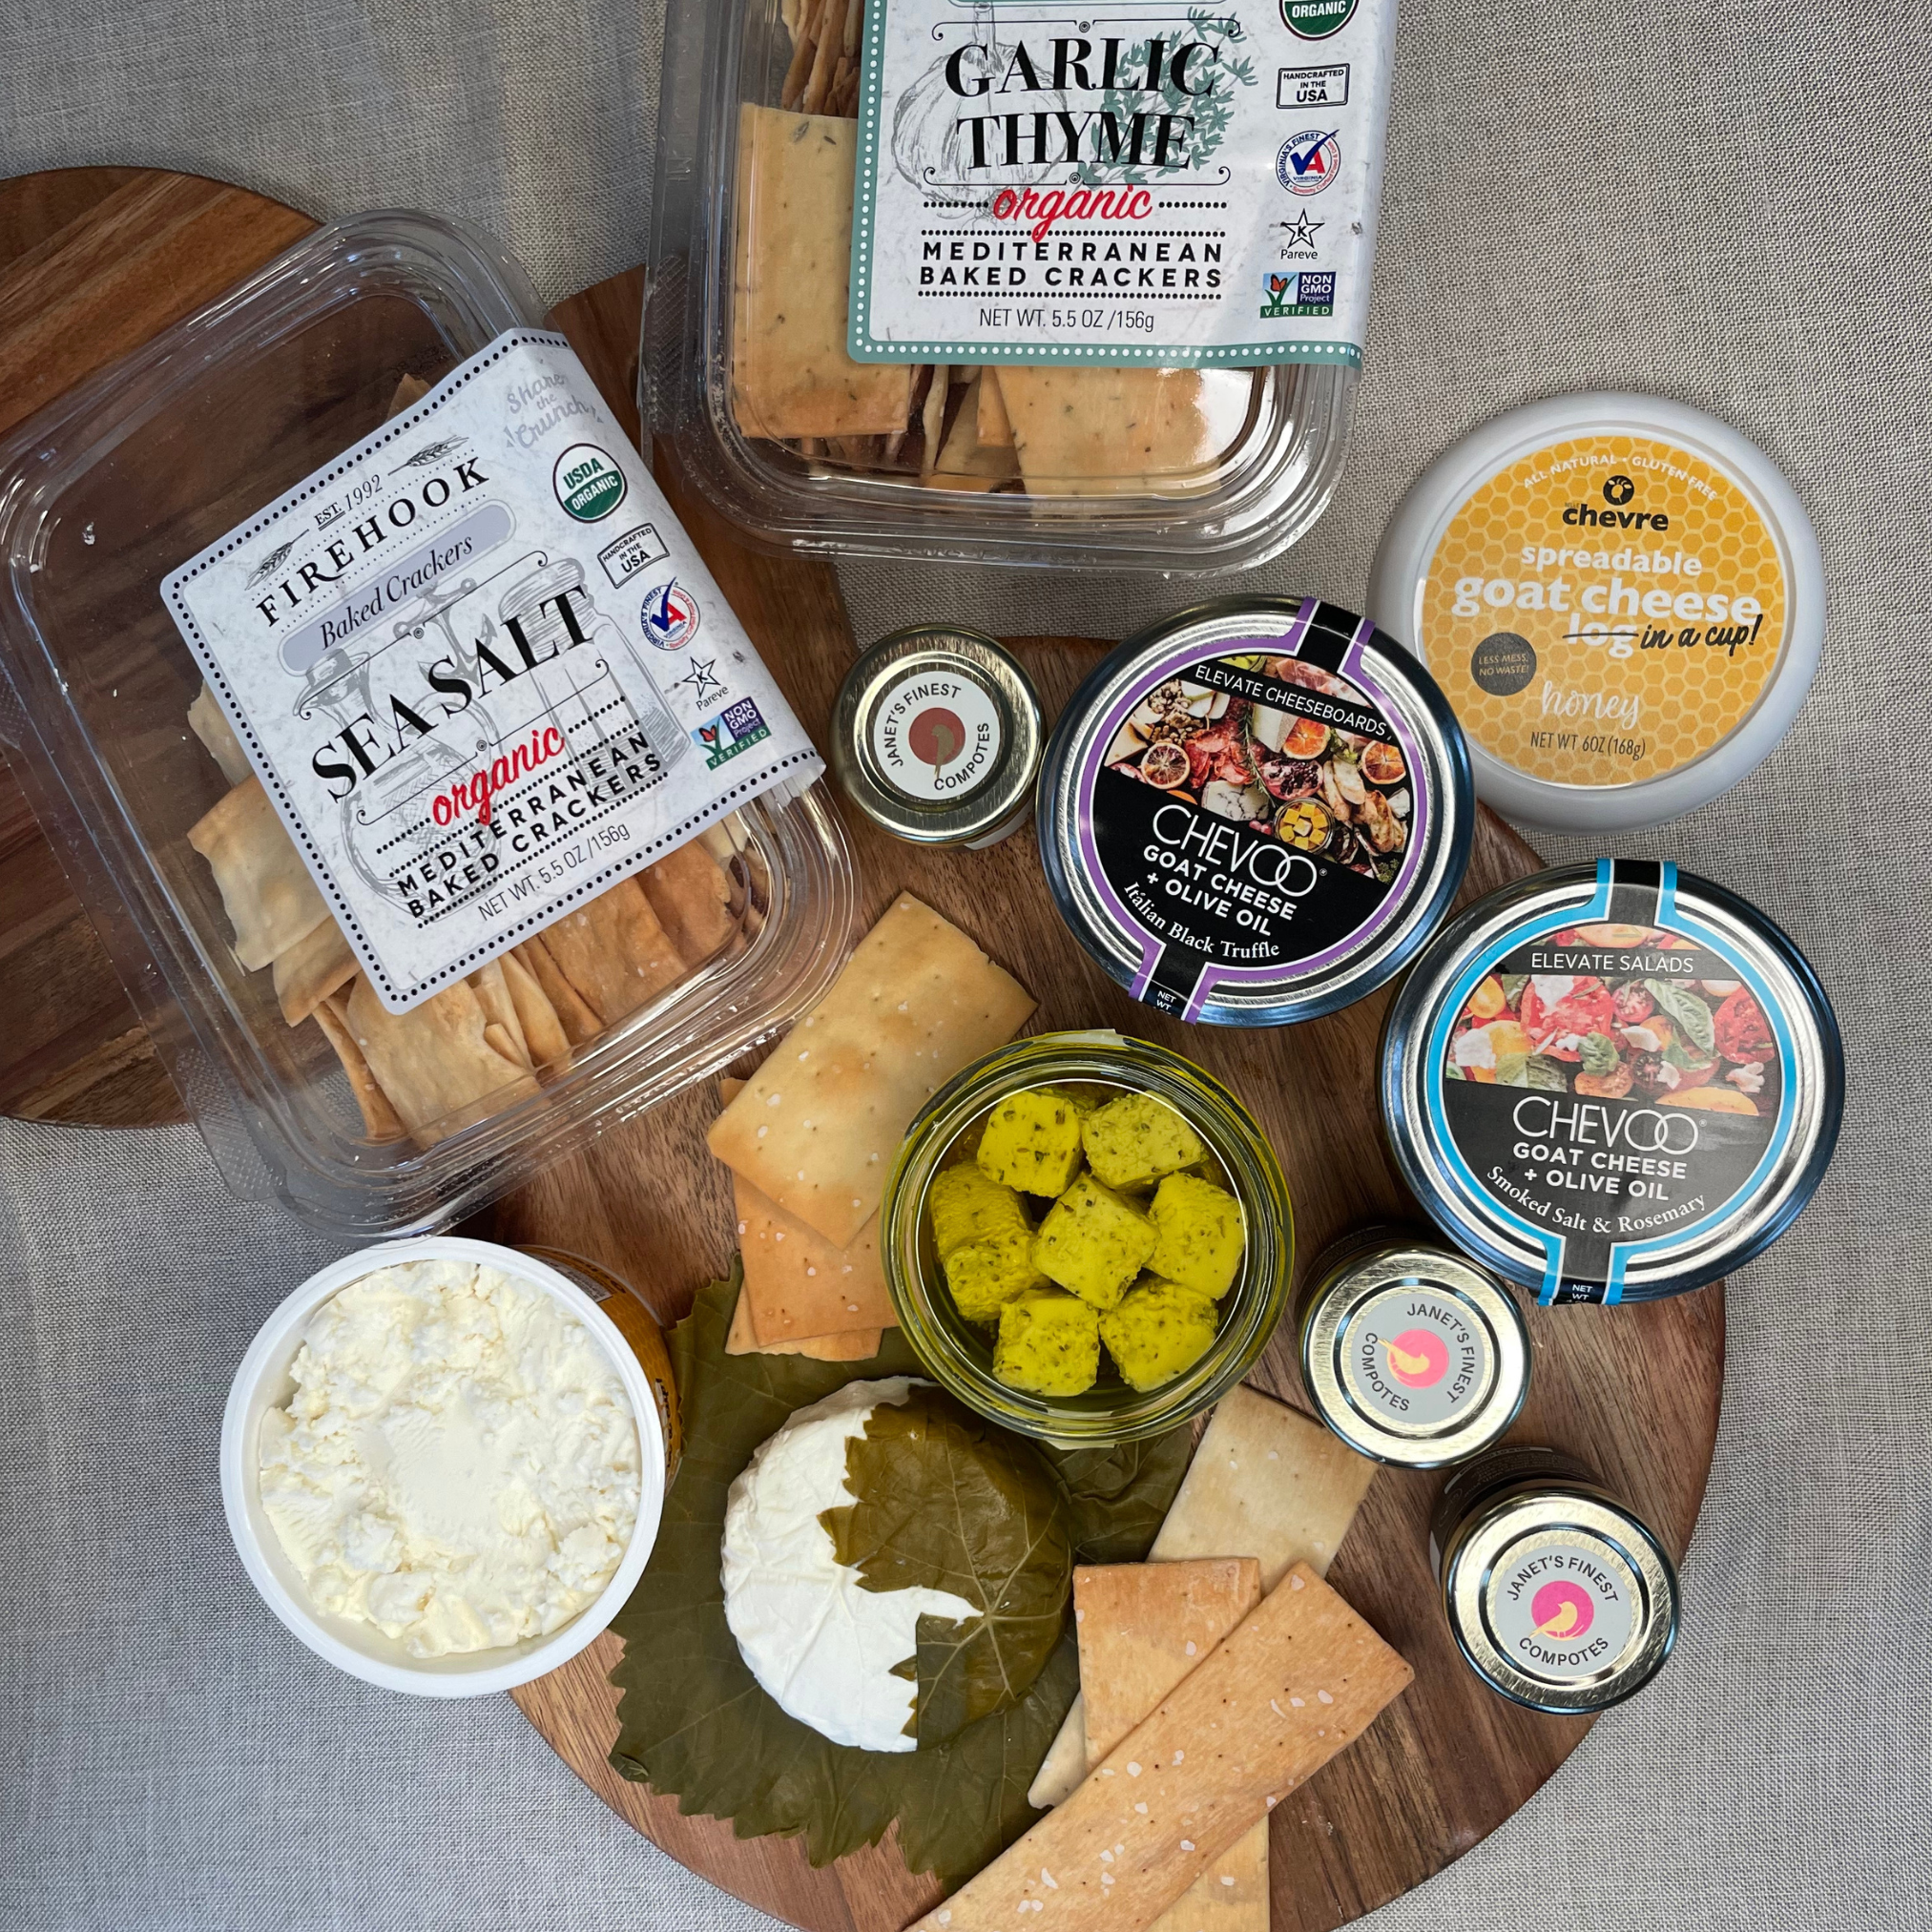 The Belle Cheese Board Goat Cheese Assortment